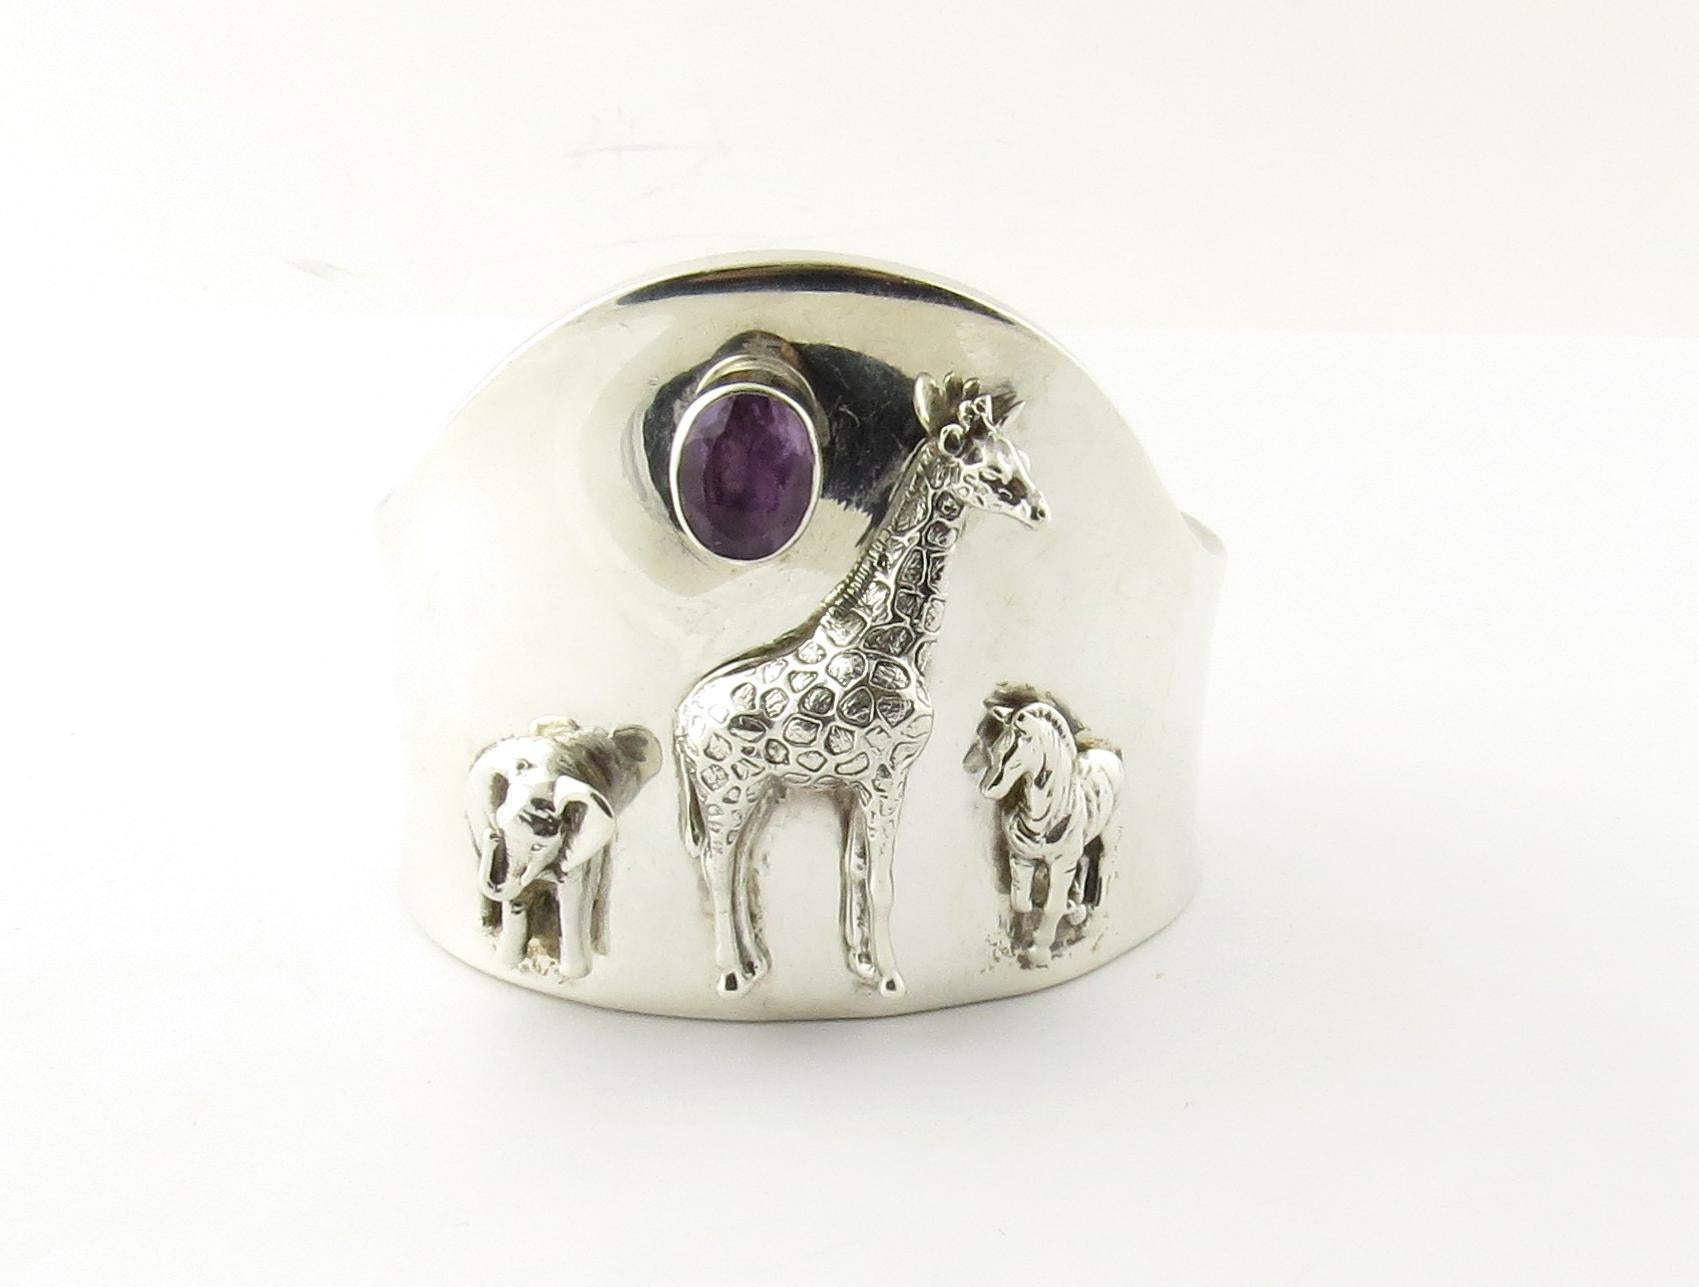 Carol Felley Southwestern Sterling Silver Wildlife Amethyst Cuff Bracelet 1997
This beautiful cuff bracelet is designed with a Elephant, Giraffe and Mustang Horse
An oval bezel set amethyst approx. 12mm x 10mm also adorns the front of the